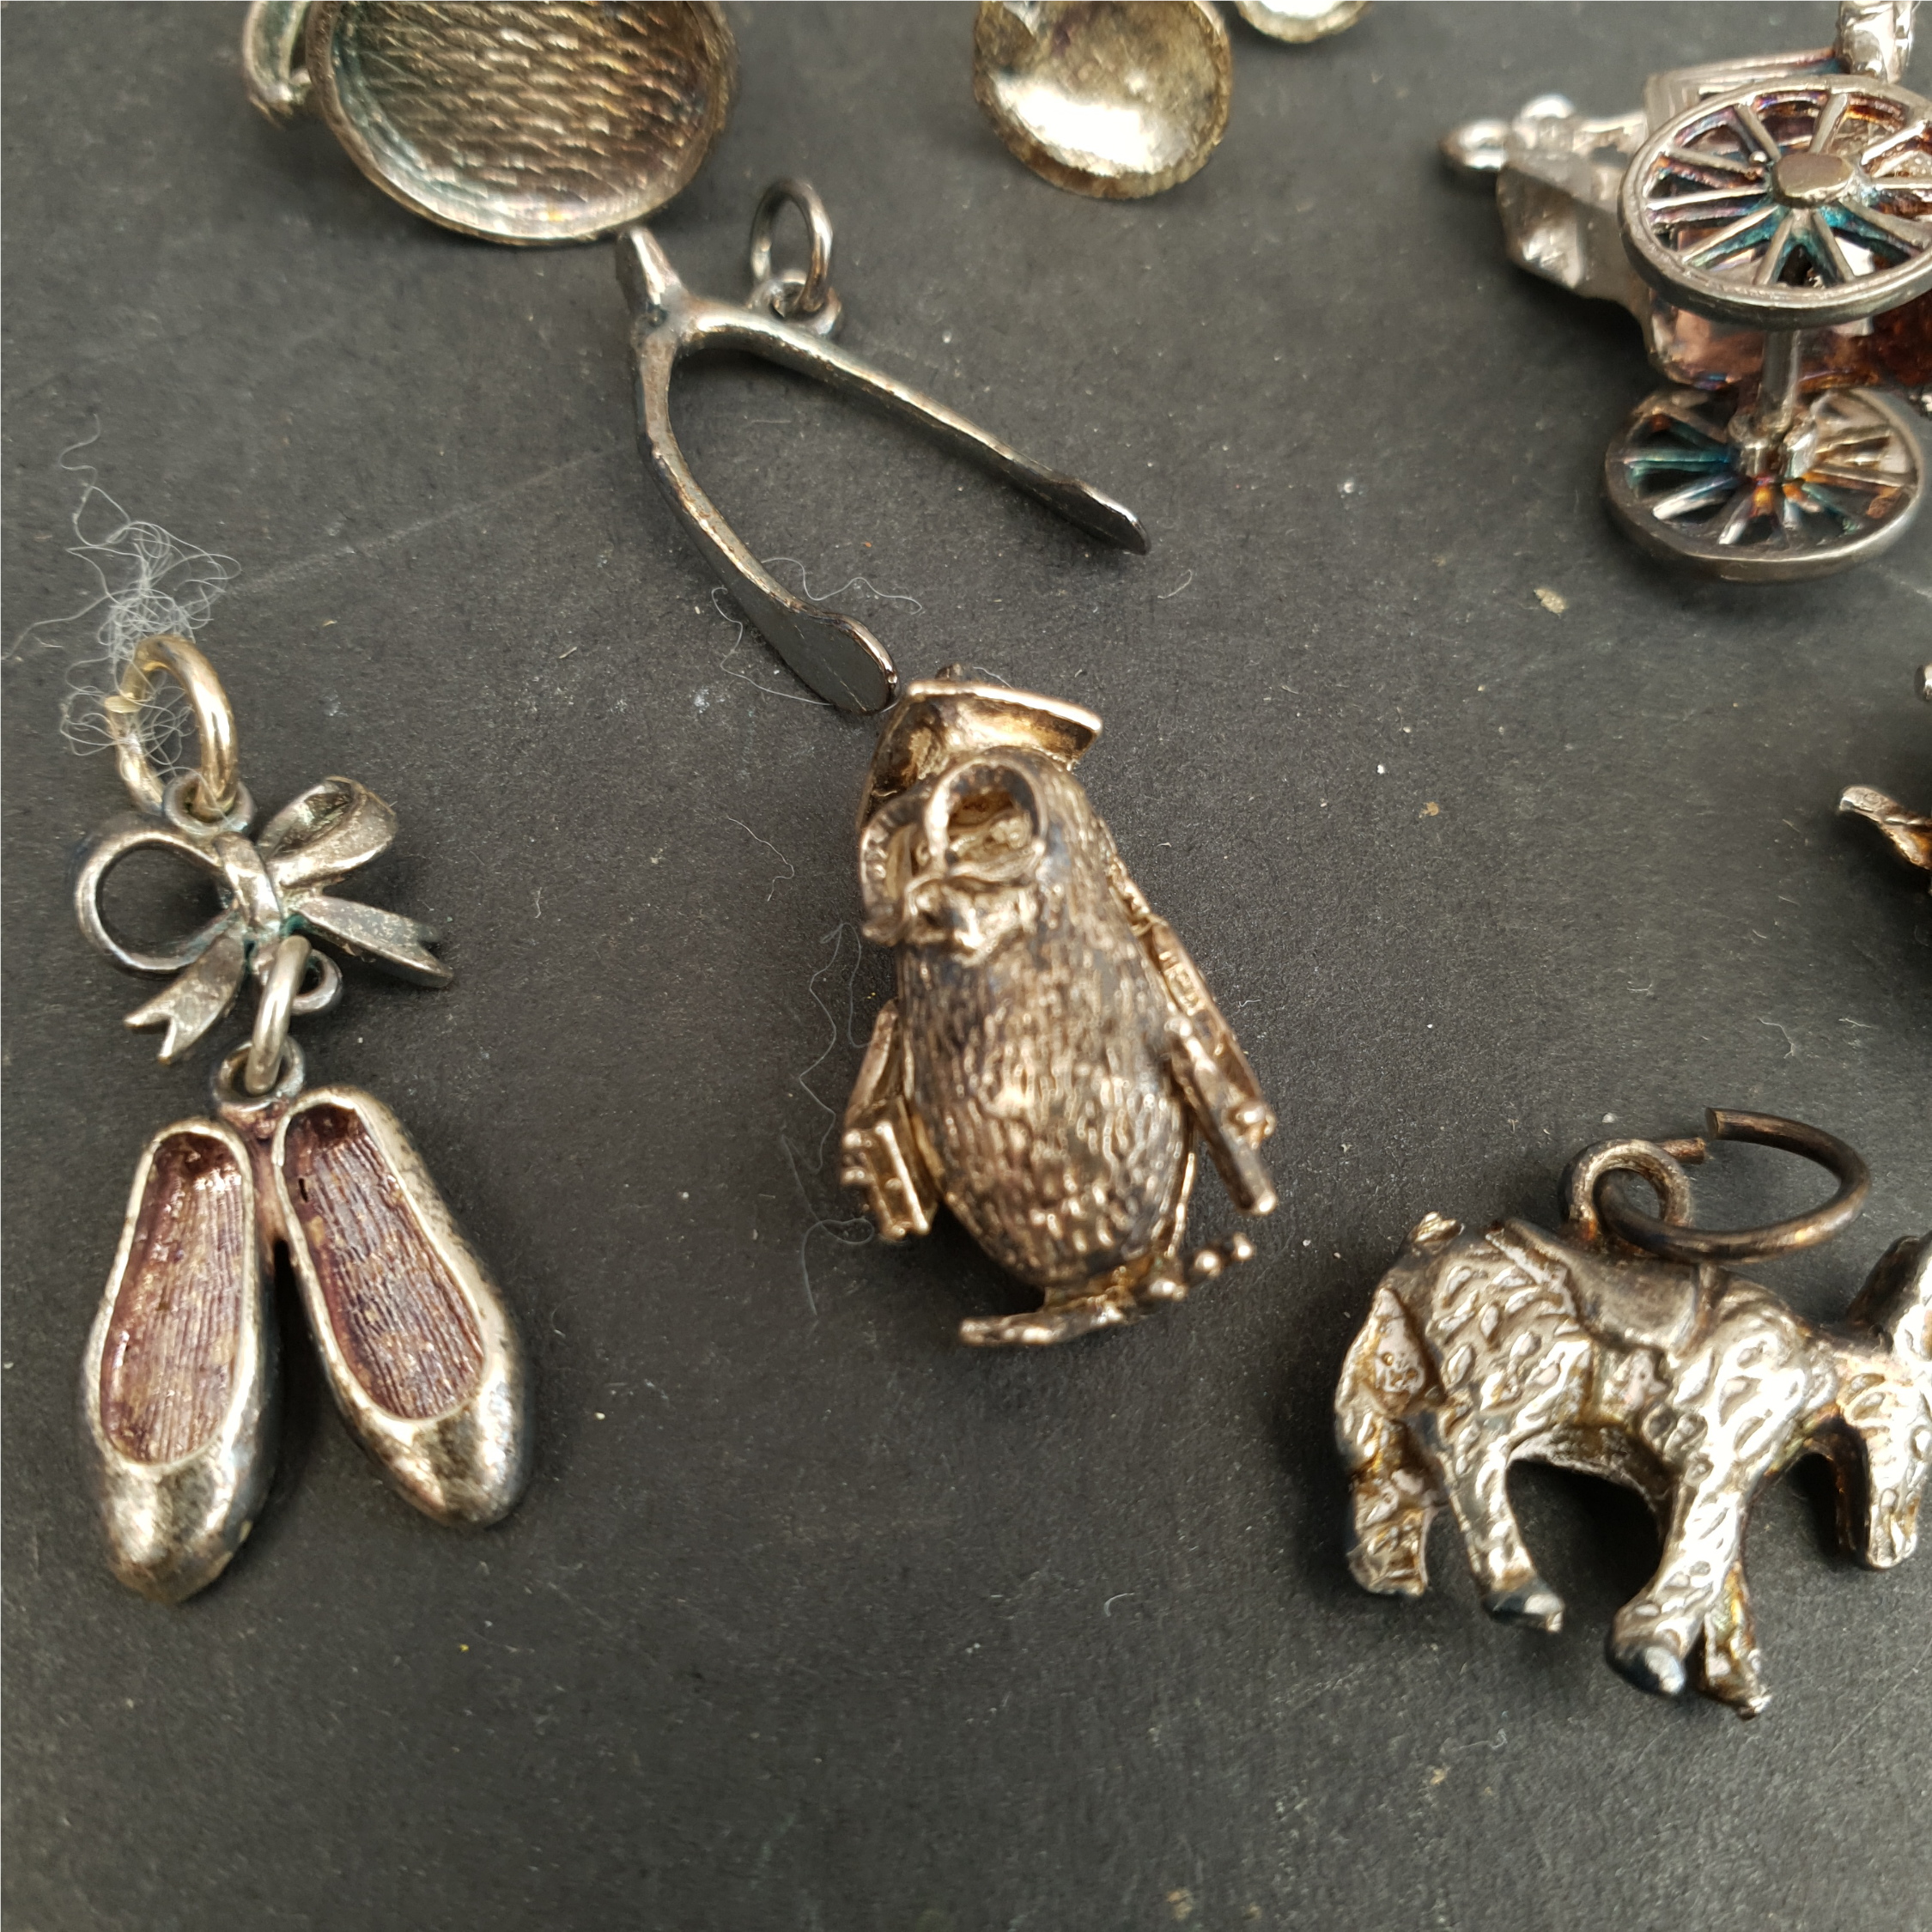 Vintage Parcel of 8 Silver Charms Includes Donkey Owl Ballet Shoes etc. - Image 2 of 2